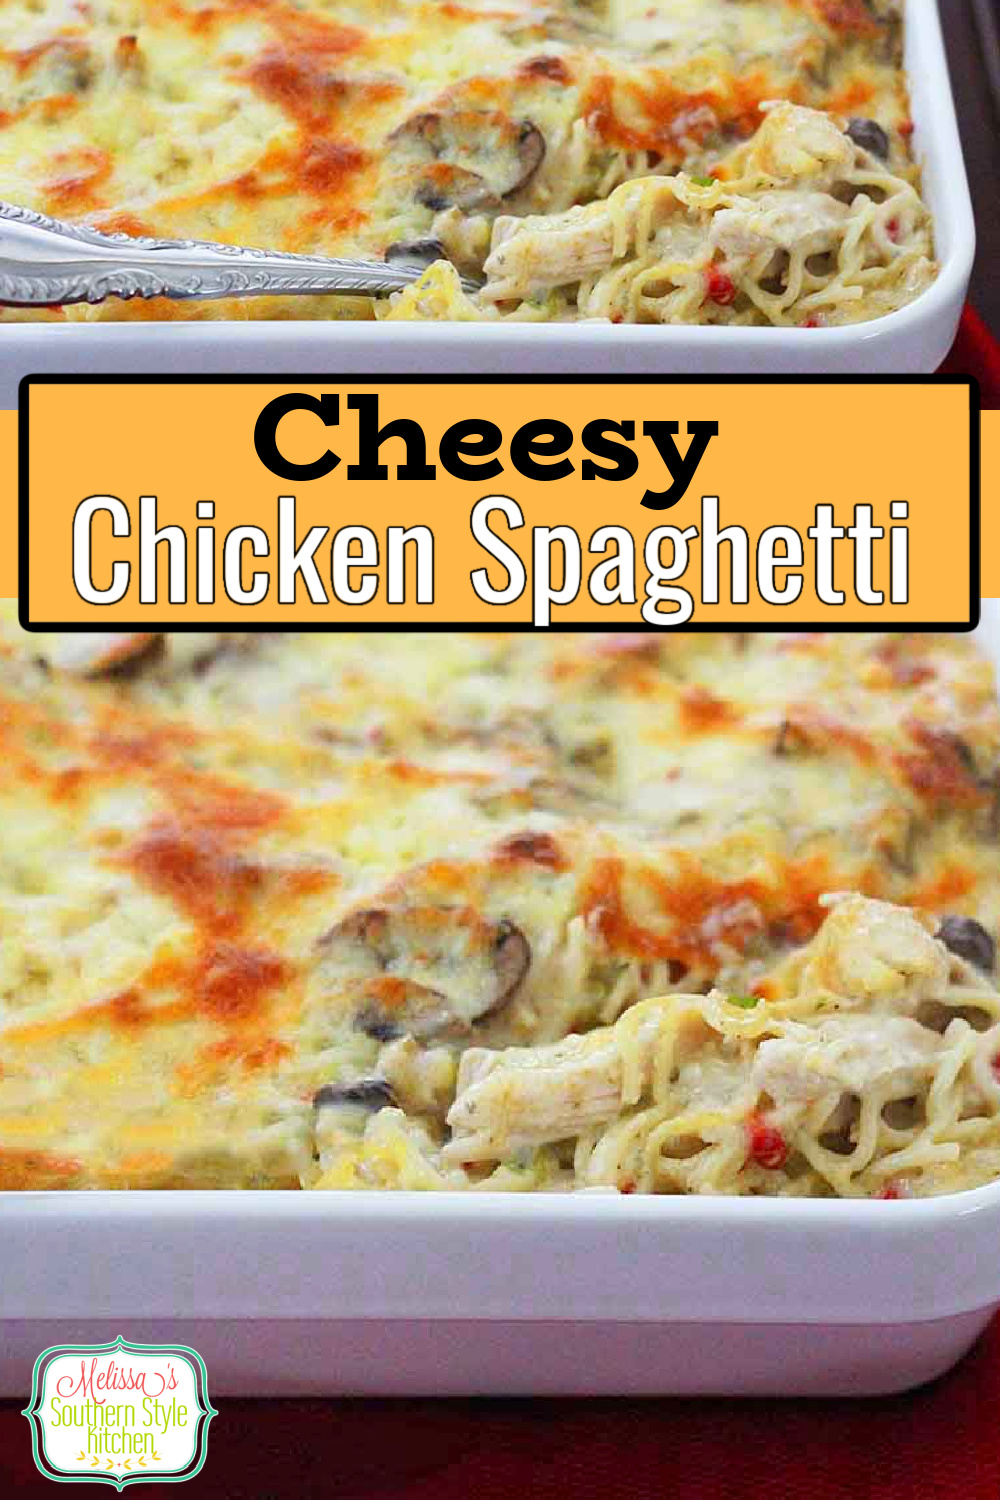 This delicious Cheesy Chicken Spaghetti features a creamy homemade sauce, tender pasta and chicken for a family friendly potluck meal #chickenspaghetti #cheesychickenspaghetti #spaghettirecipes #spaghetti #easychickenrecipes #casseroles #southernstylespaghetti #spaghetticasseroles via @melissasssk